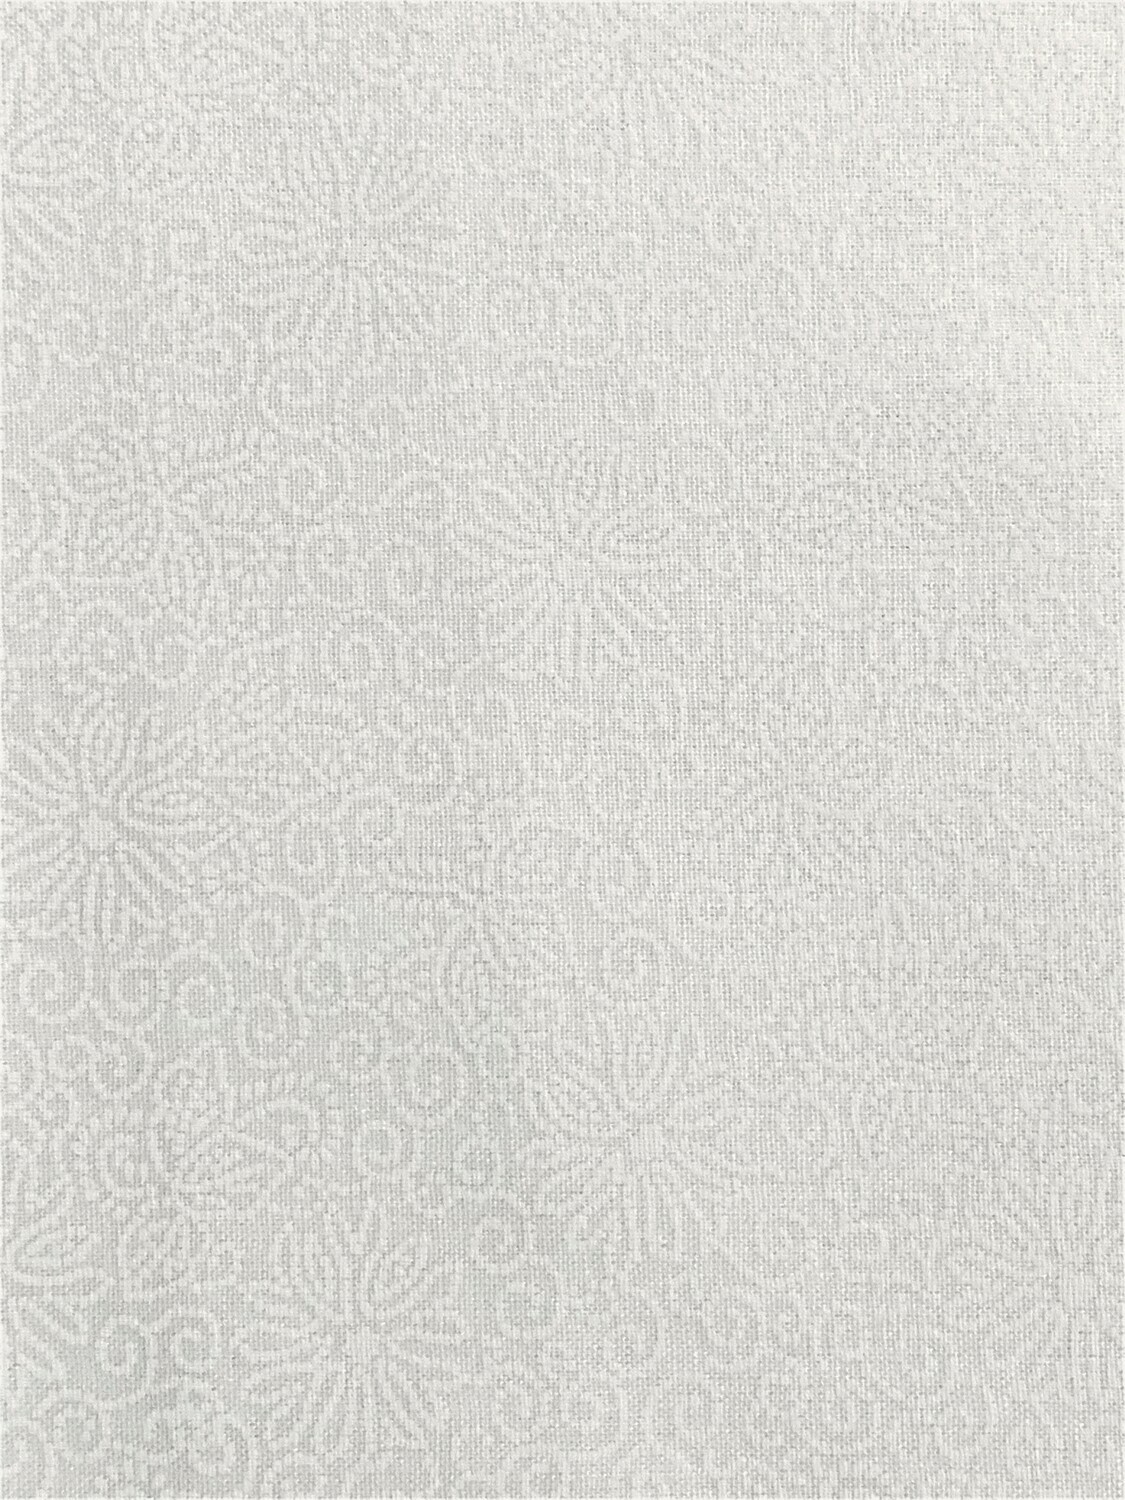 Floral Swirls, White Tone-On-Tone Blender | Quilting Cotton | 112cm wide